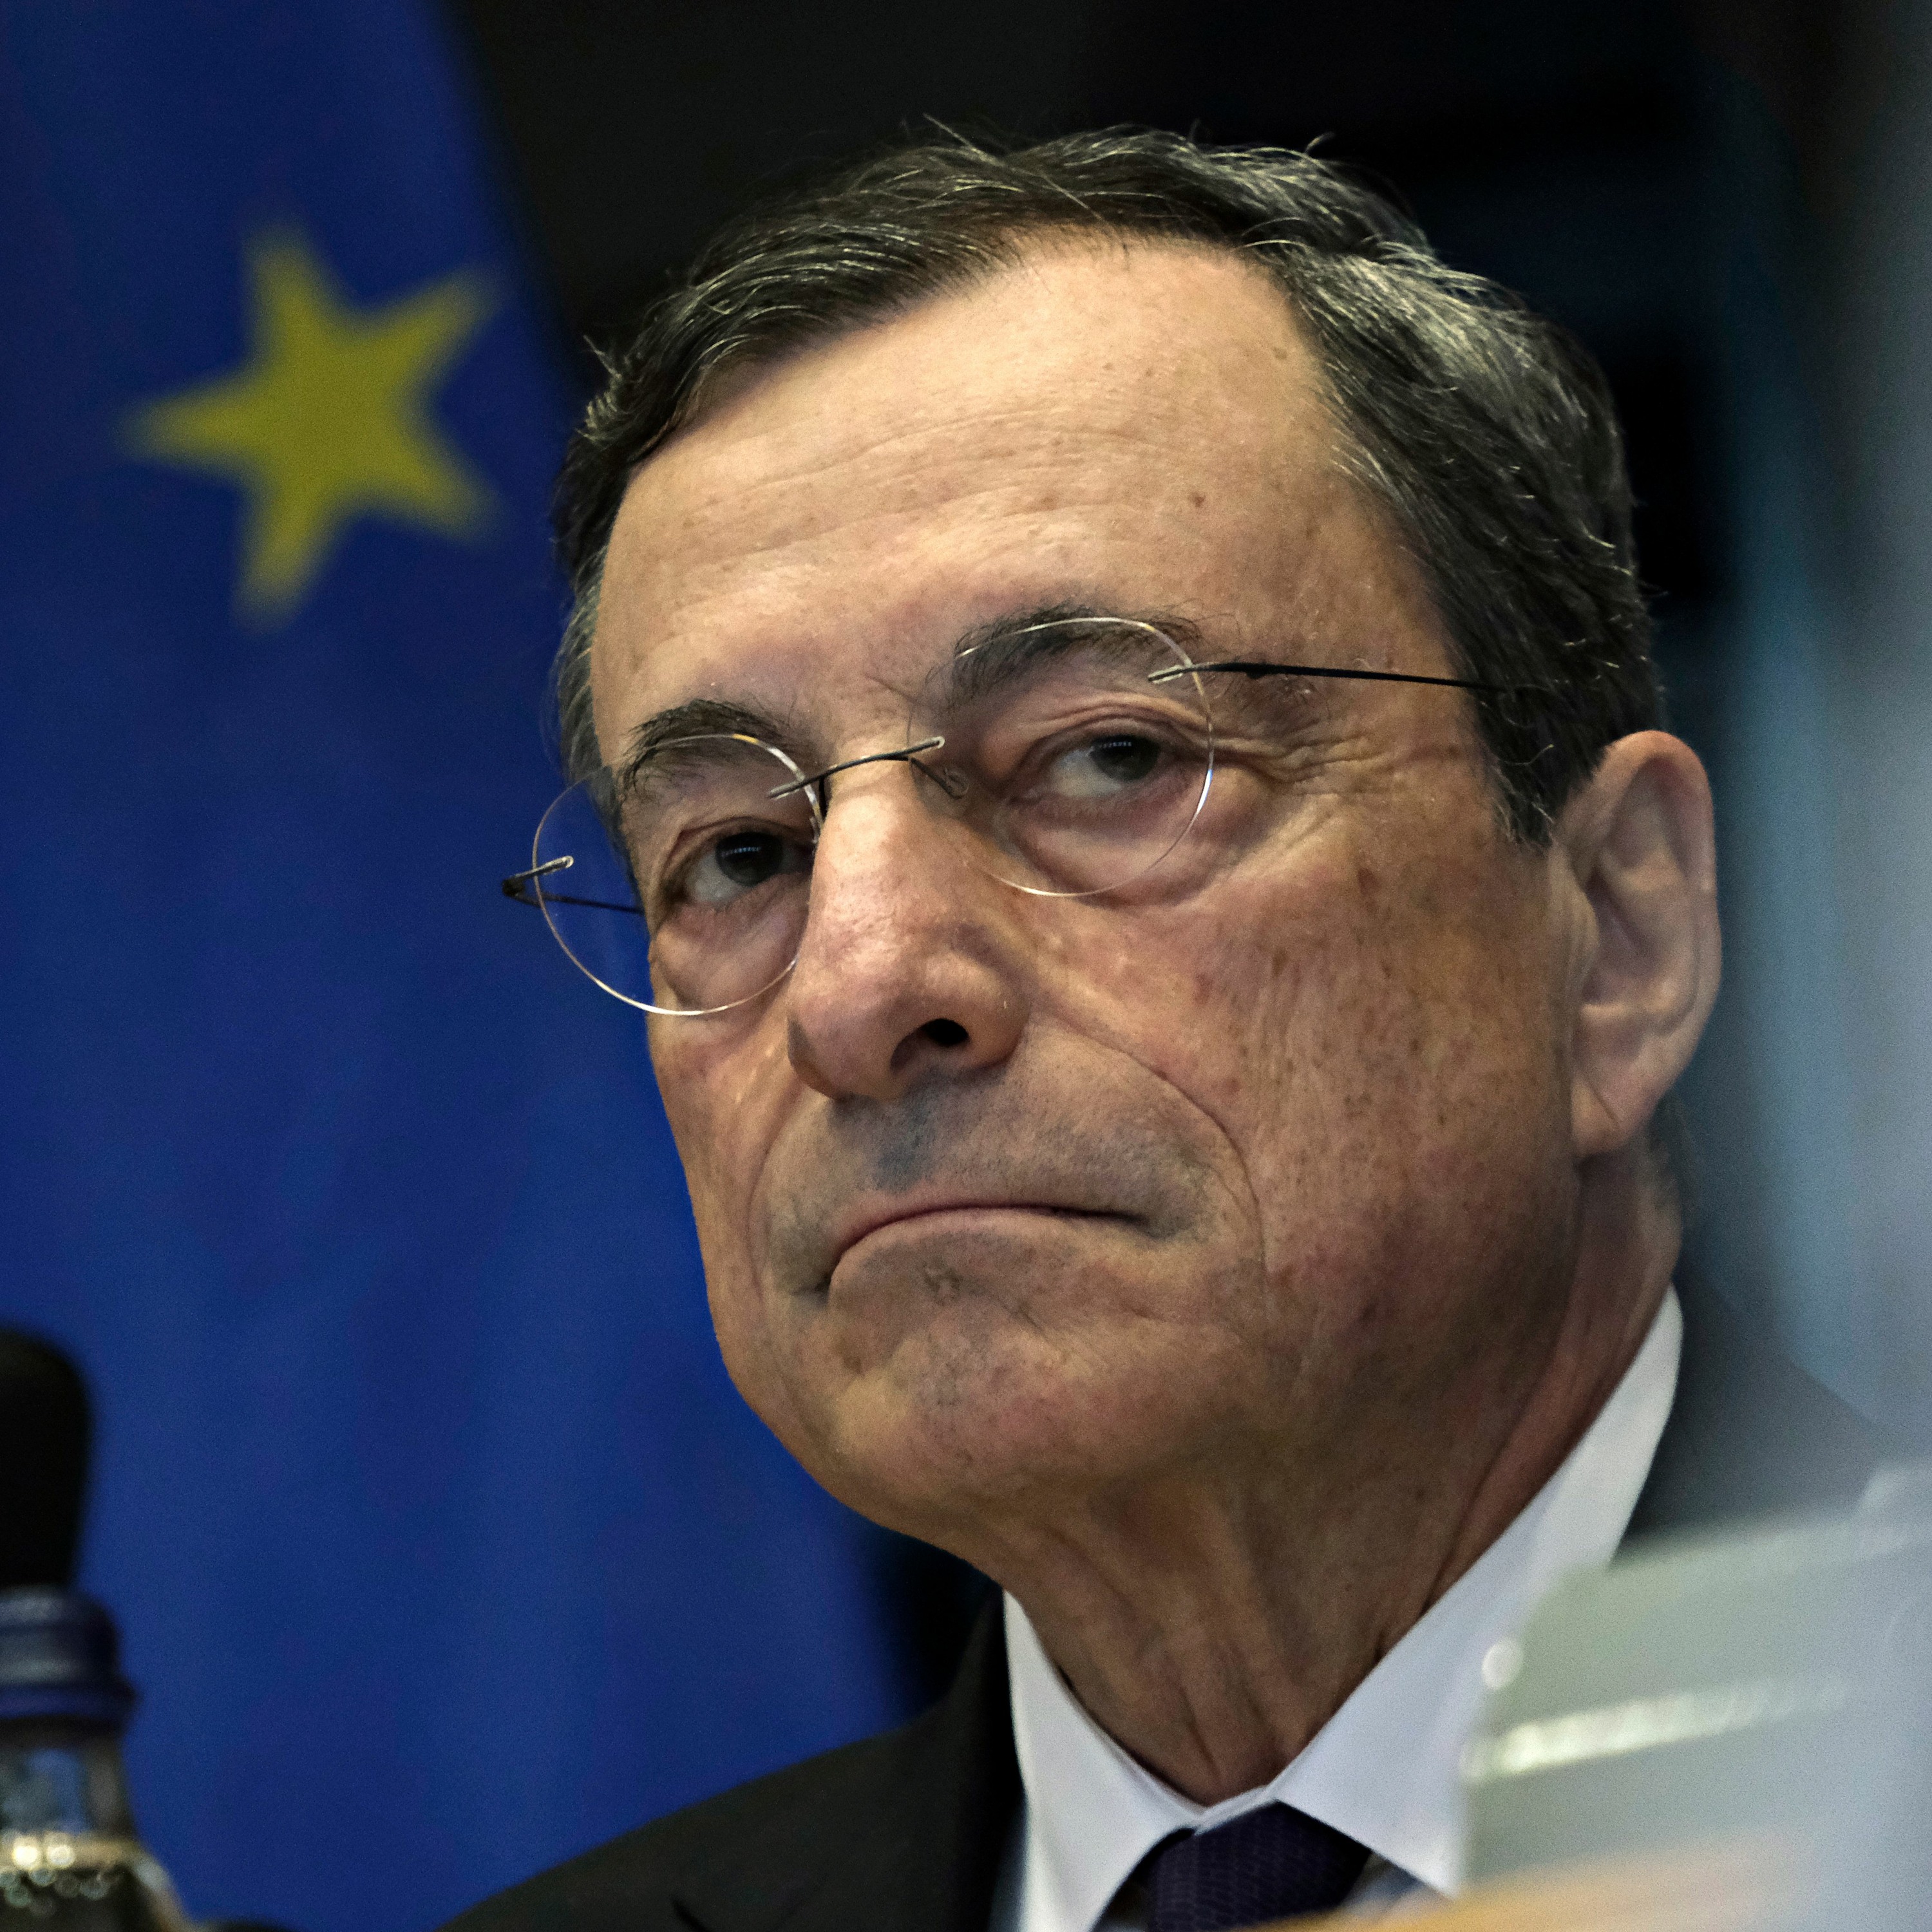 CER podcast: What does Draghi’s new government mean for Italy and Europe?